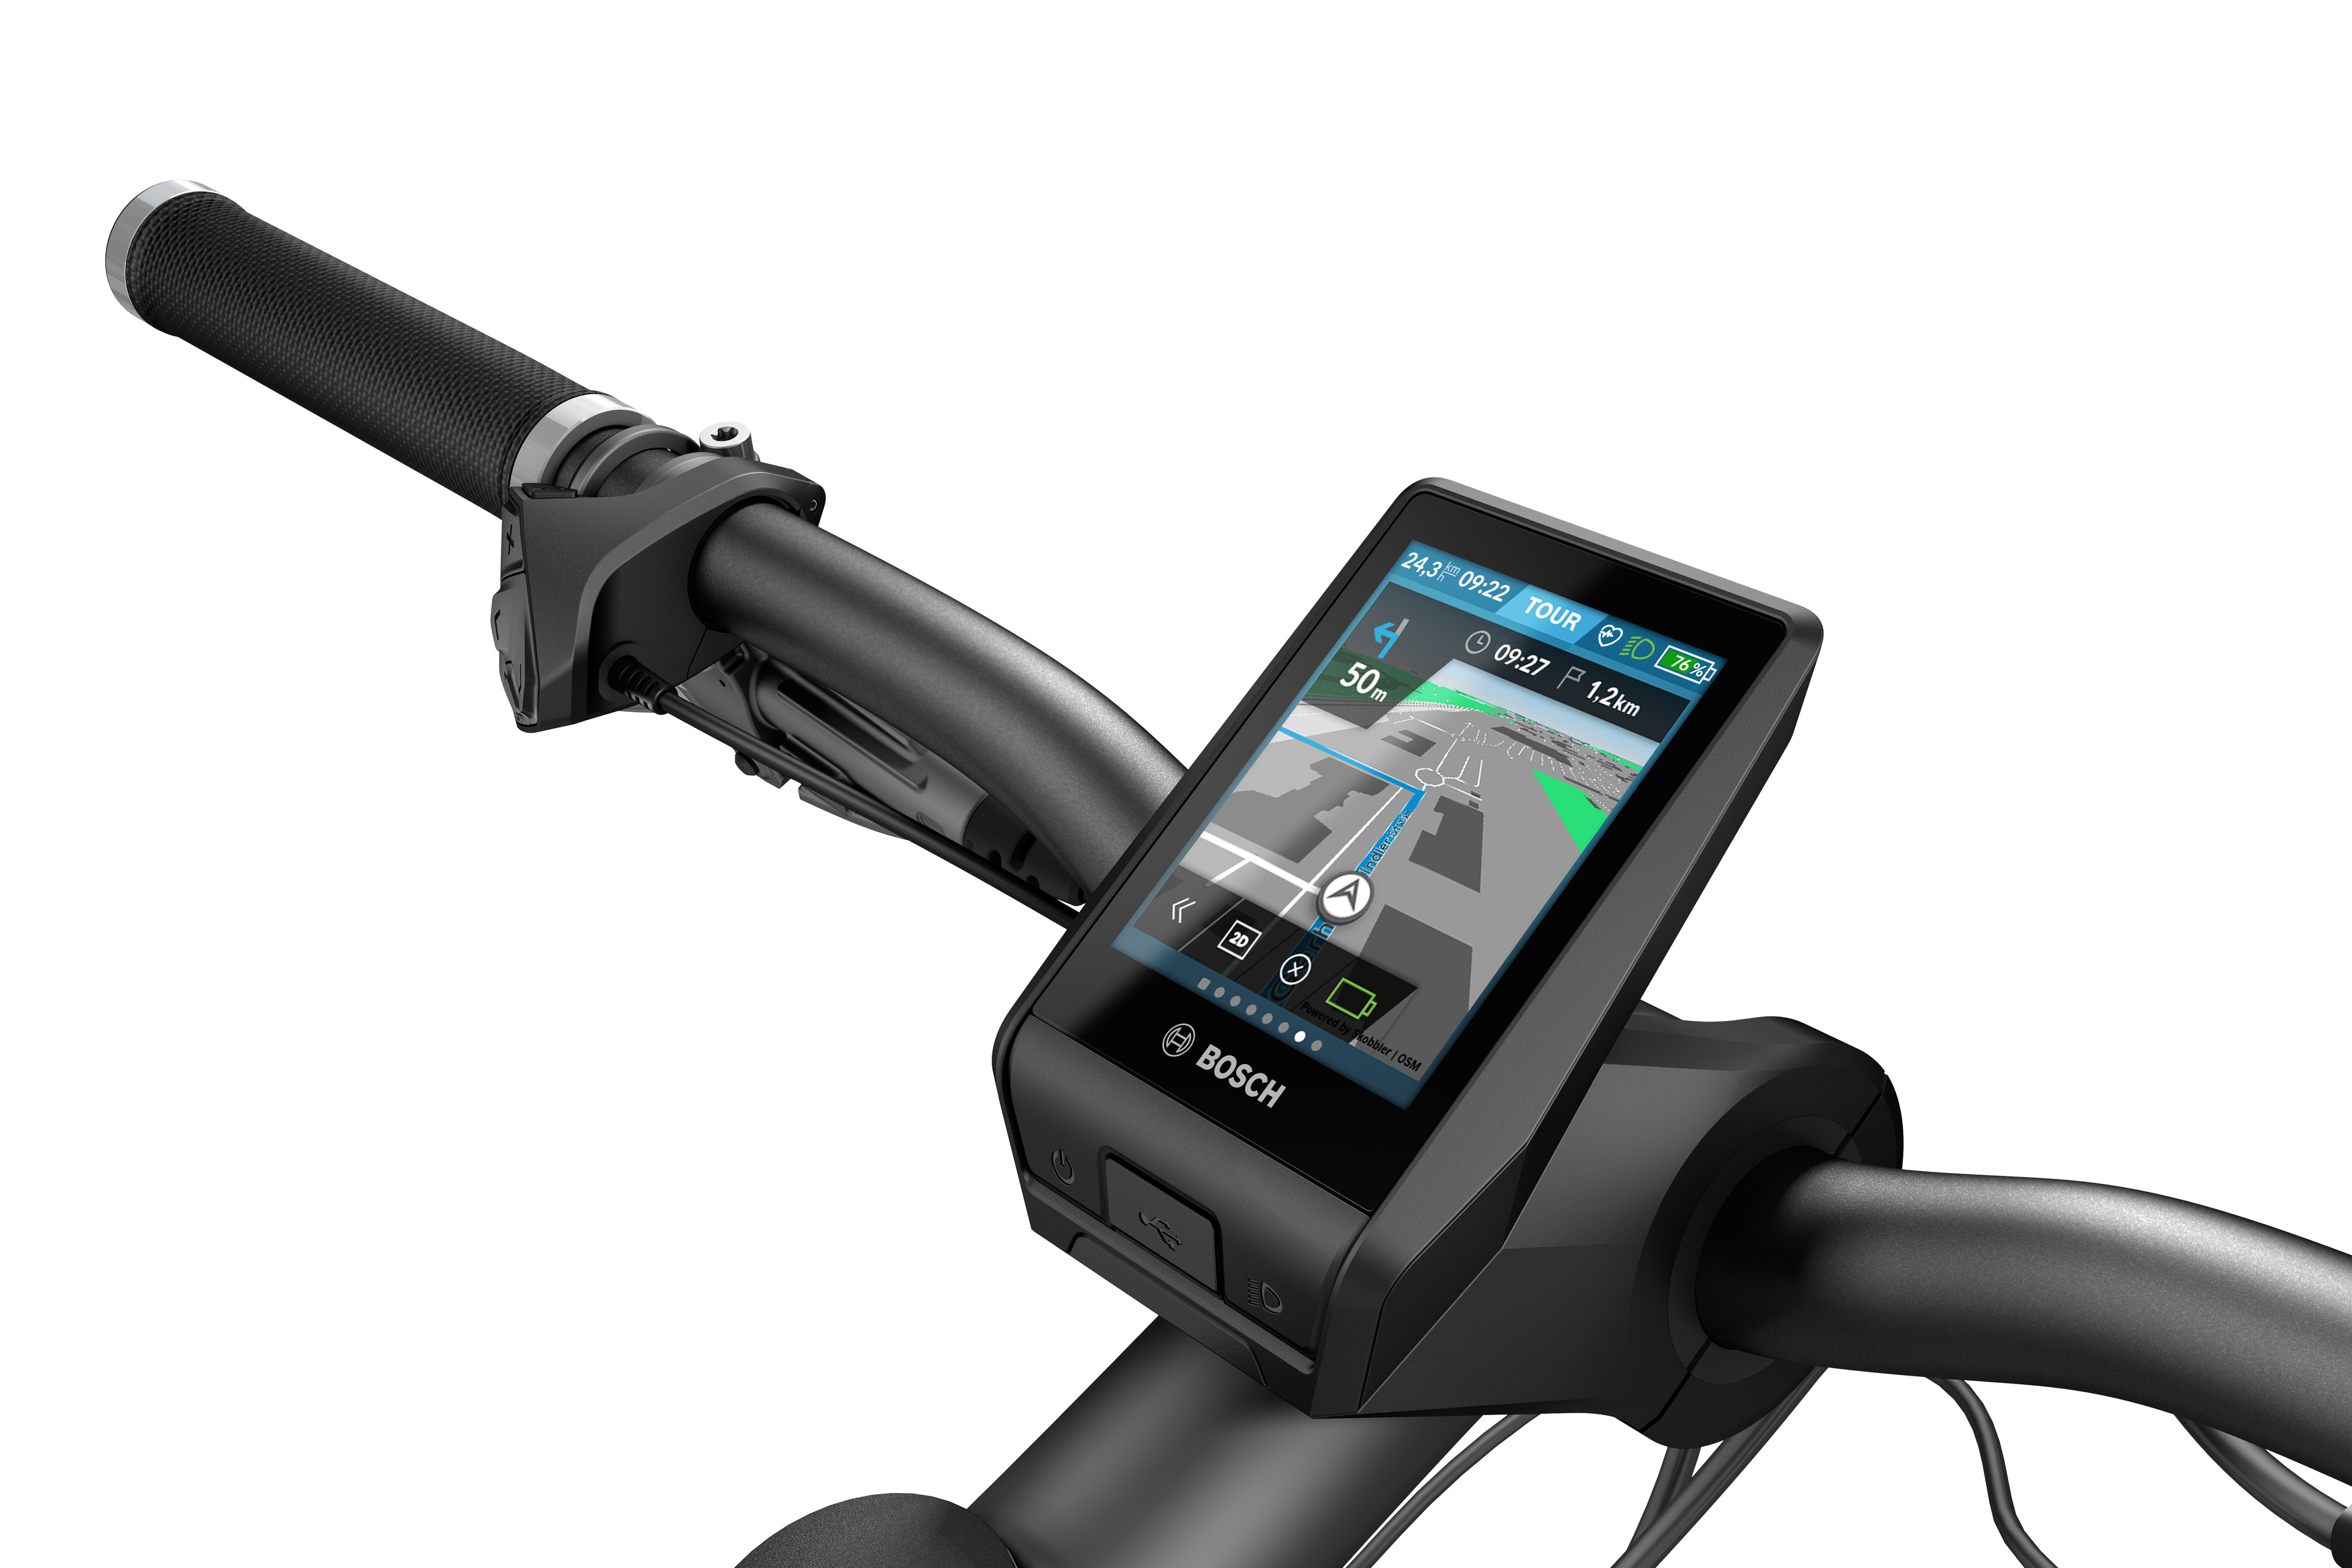 Thanks to Nyon, the eBiker is connected to the digital world and can access functions such as on-board navigation and fitness tracking.